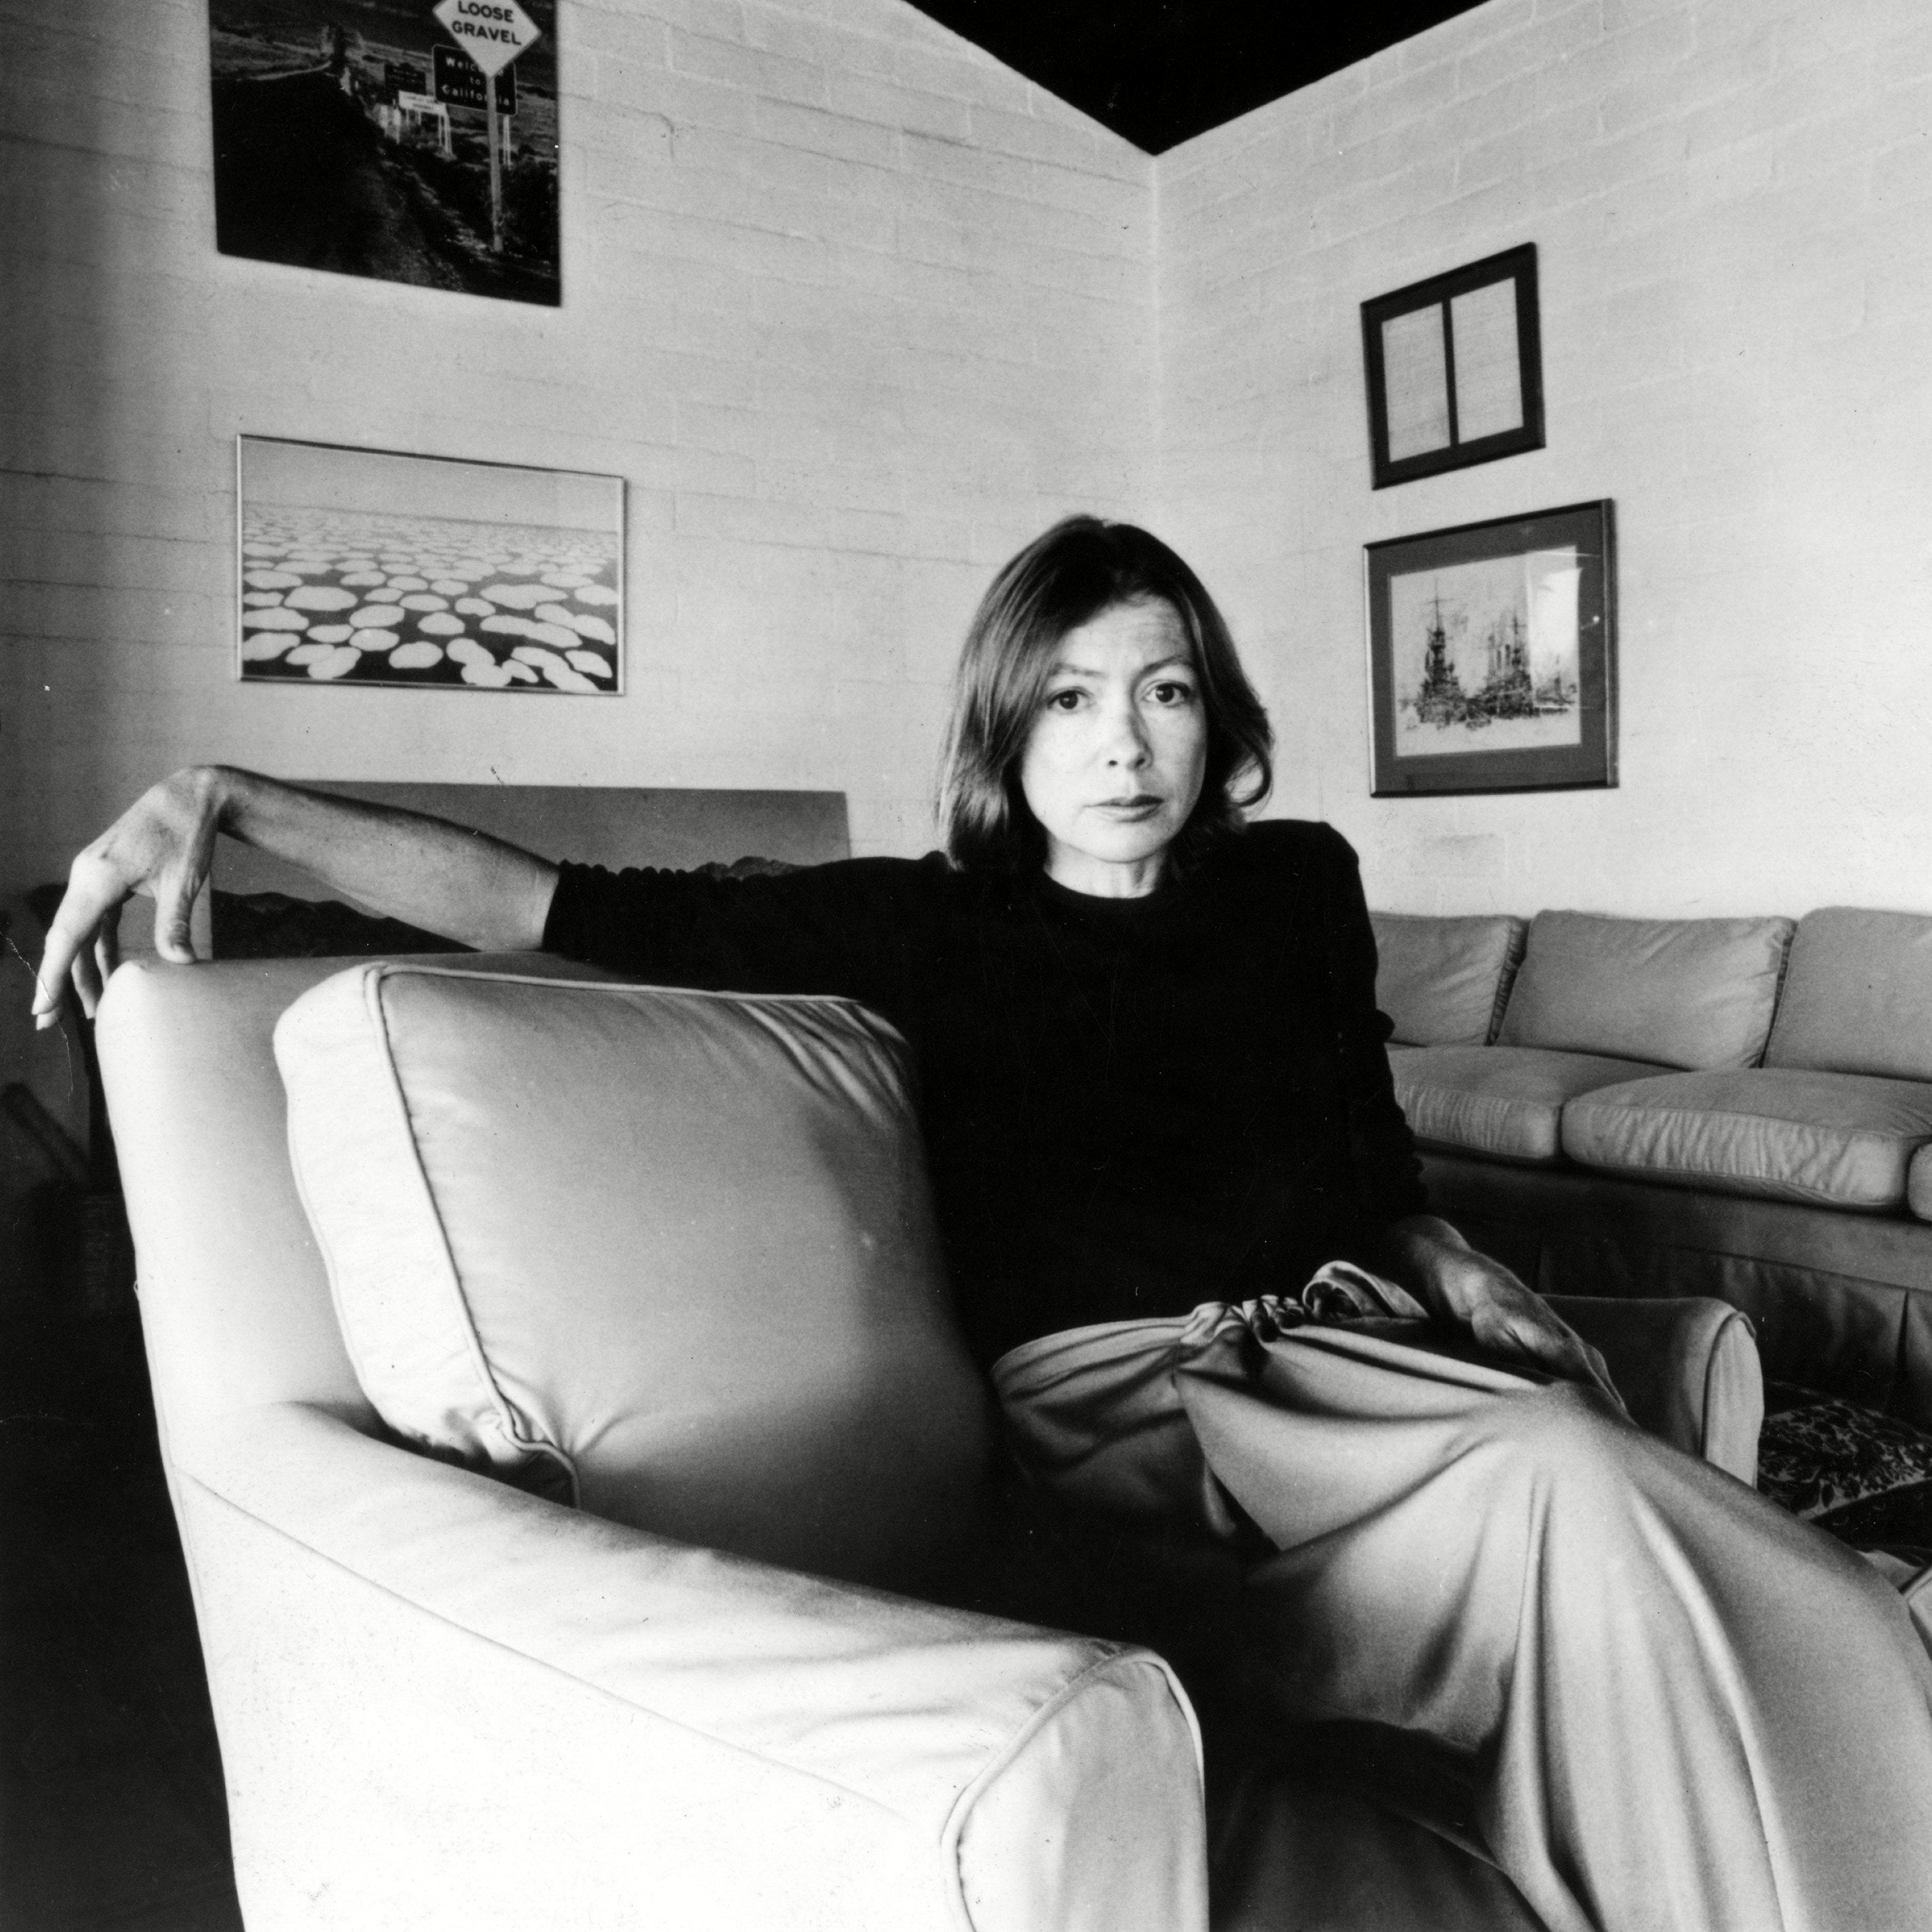 Reference black and white image of Joan Didion sitting